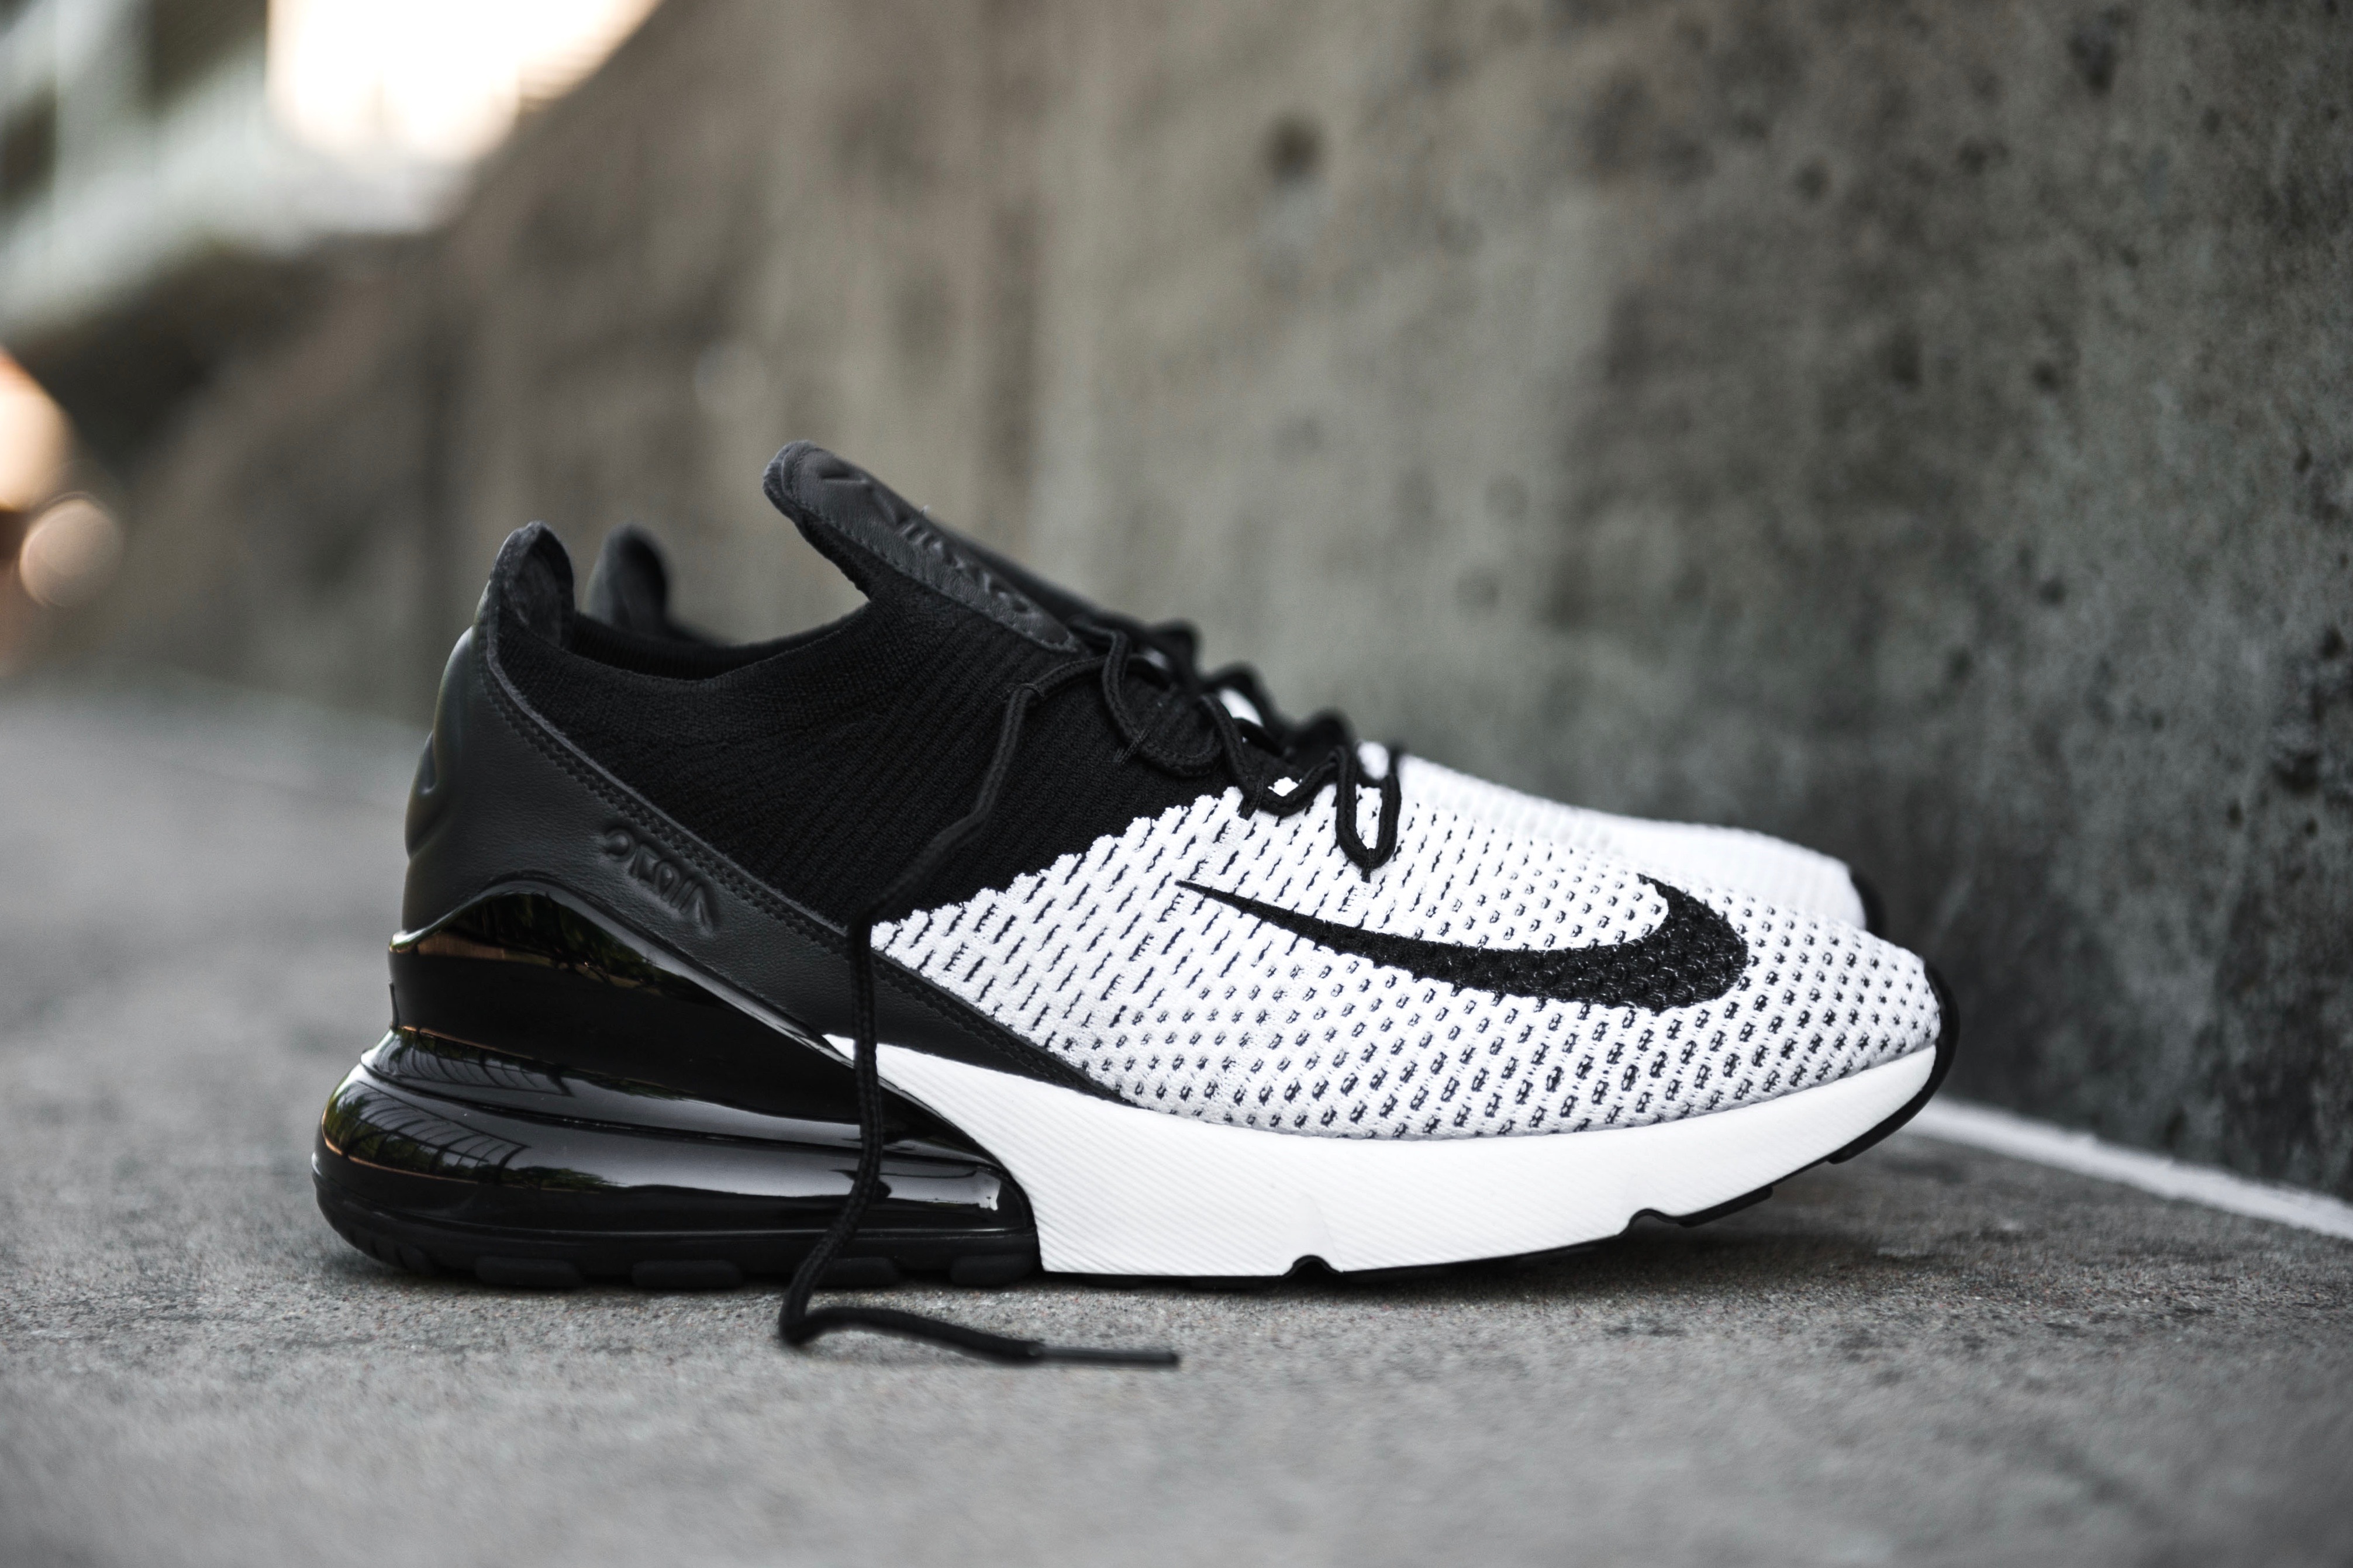 270 flyknit black and white